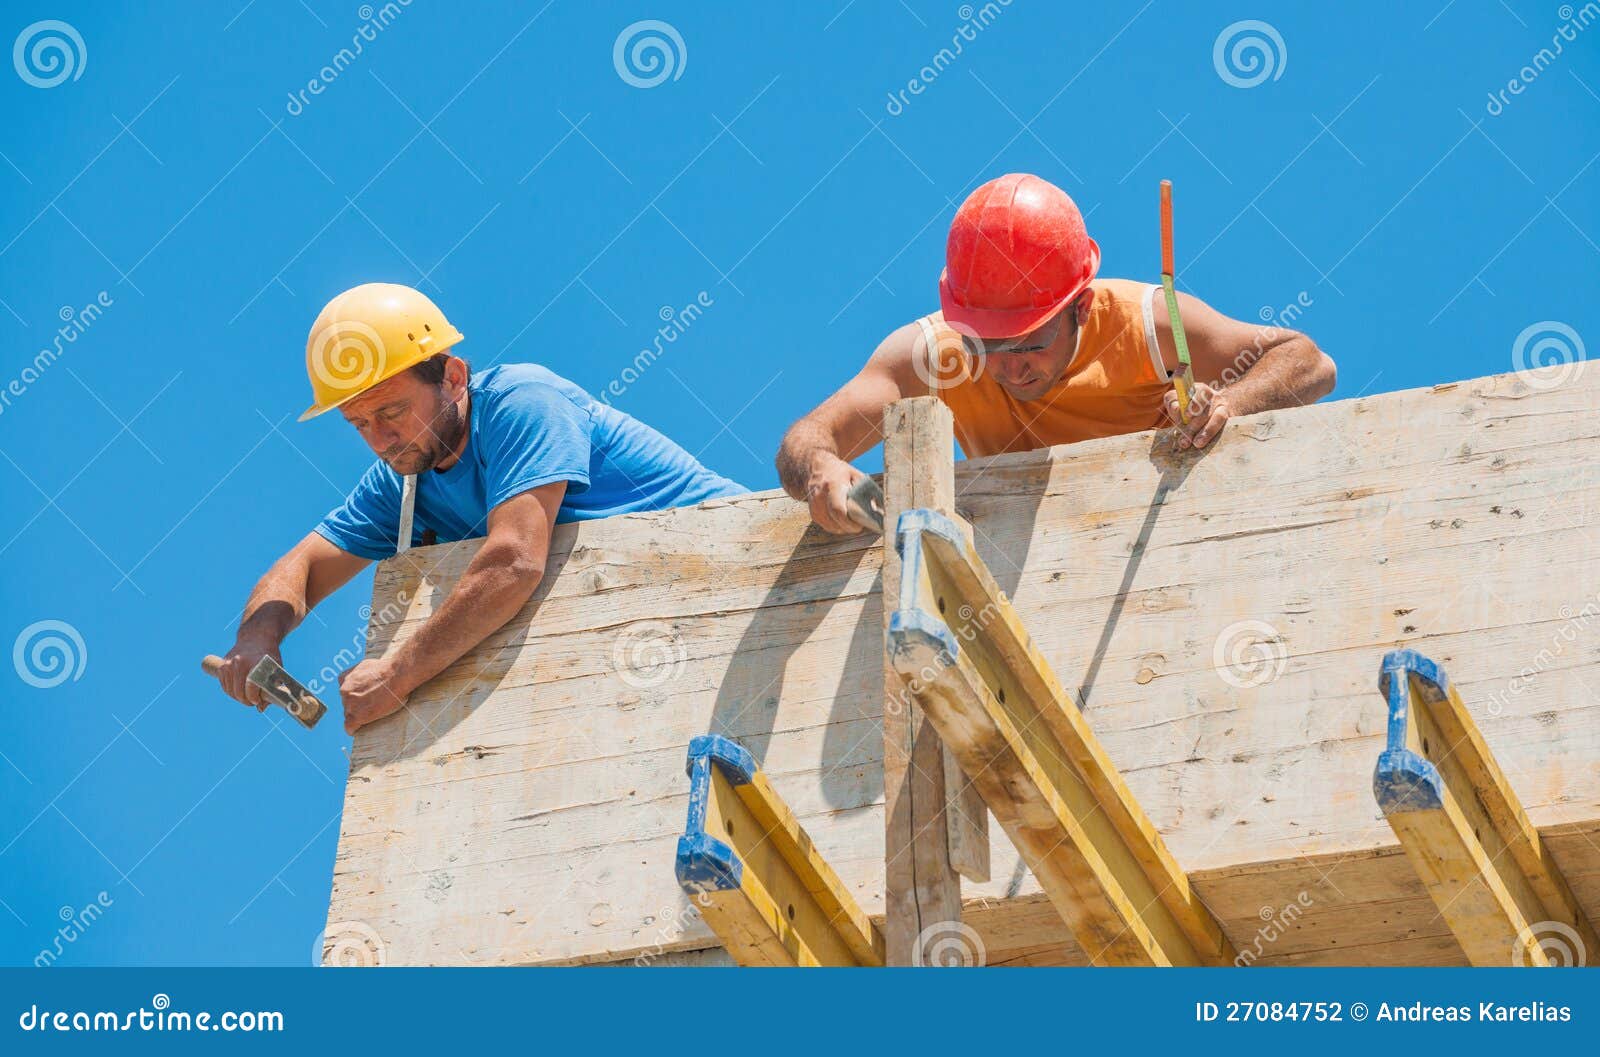 construction workers nailing formwork in place